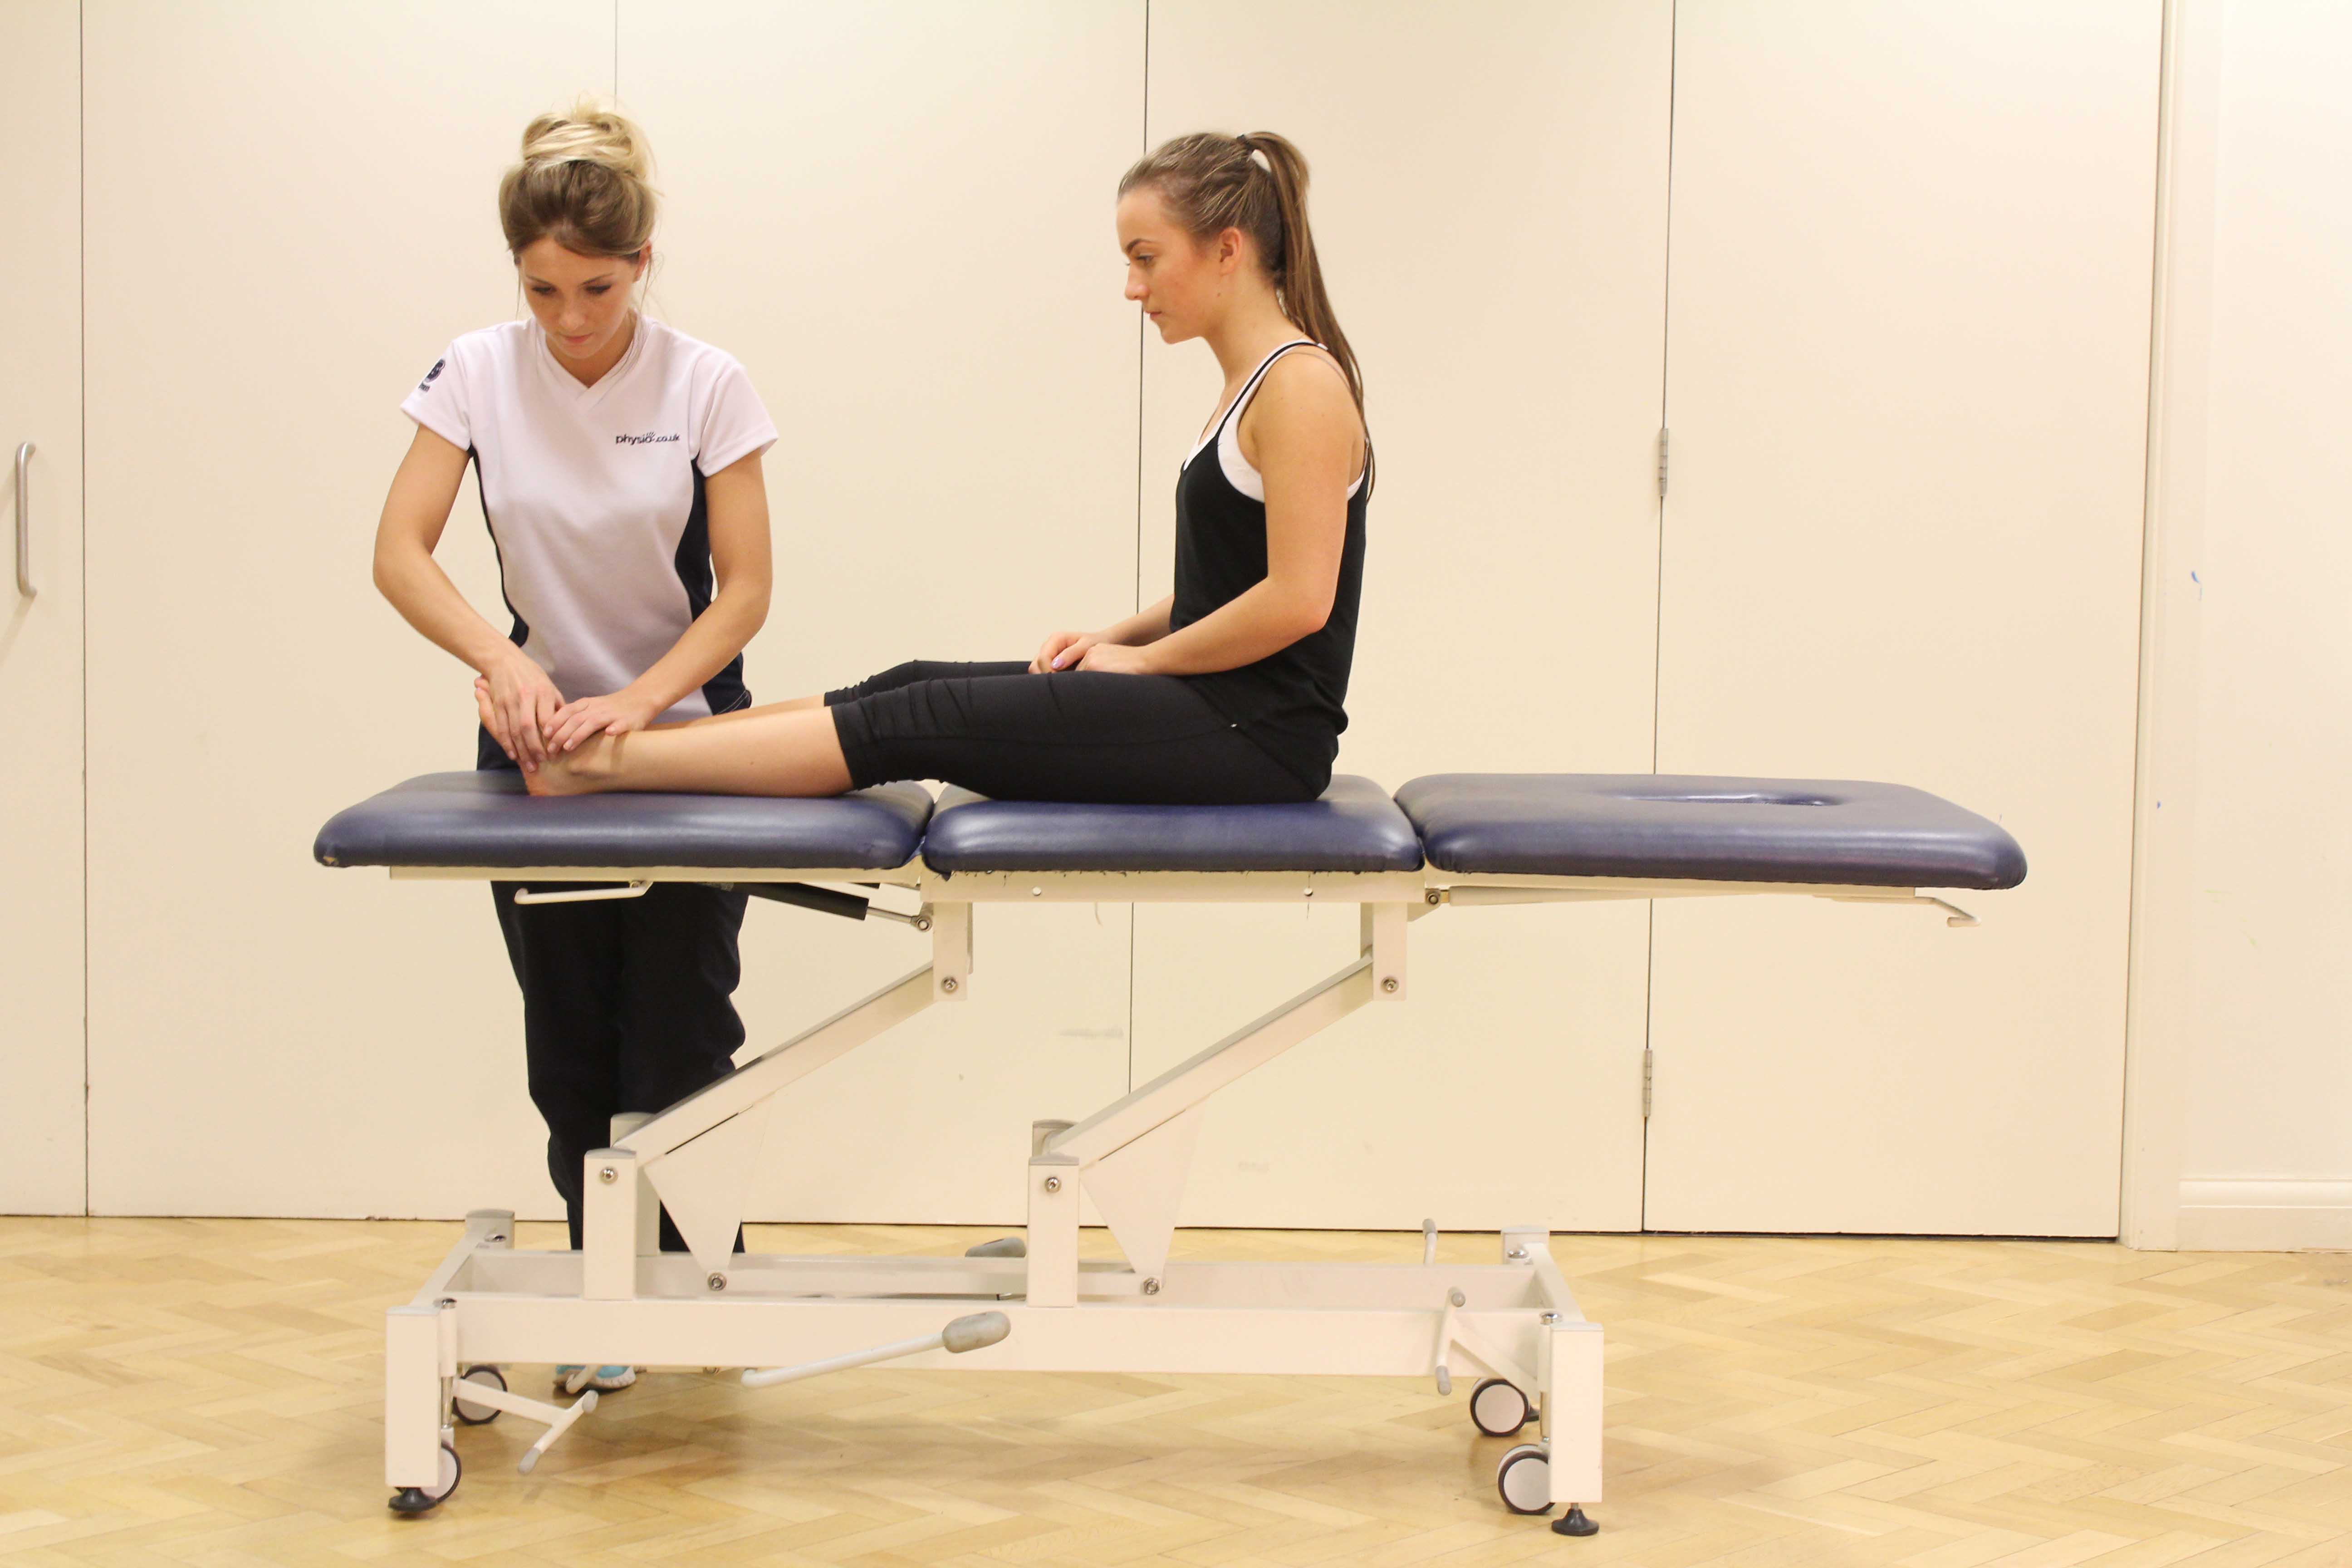 Mobilisations and stretches applied to the connective tissues in the ankle